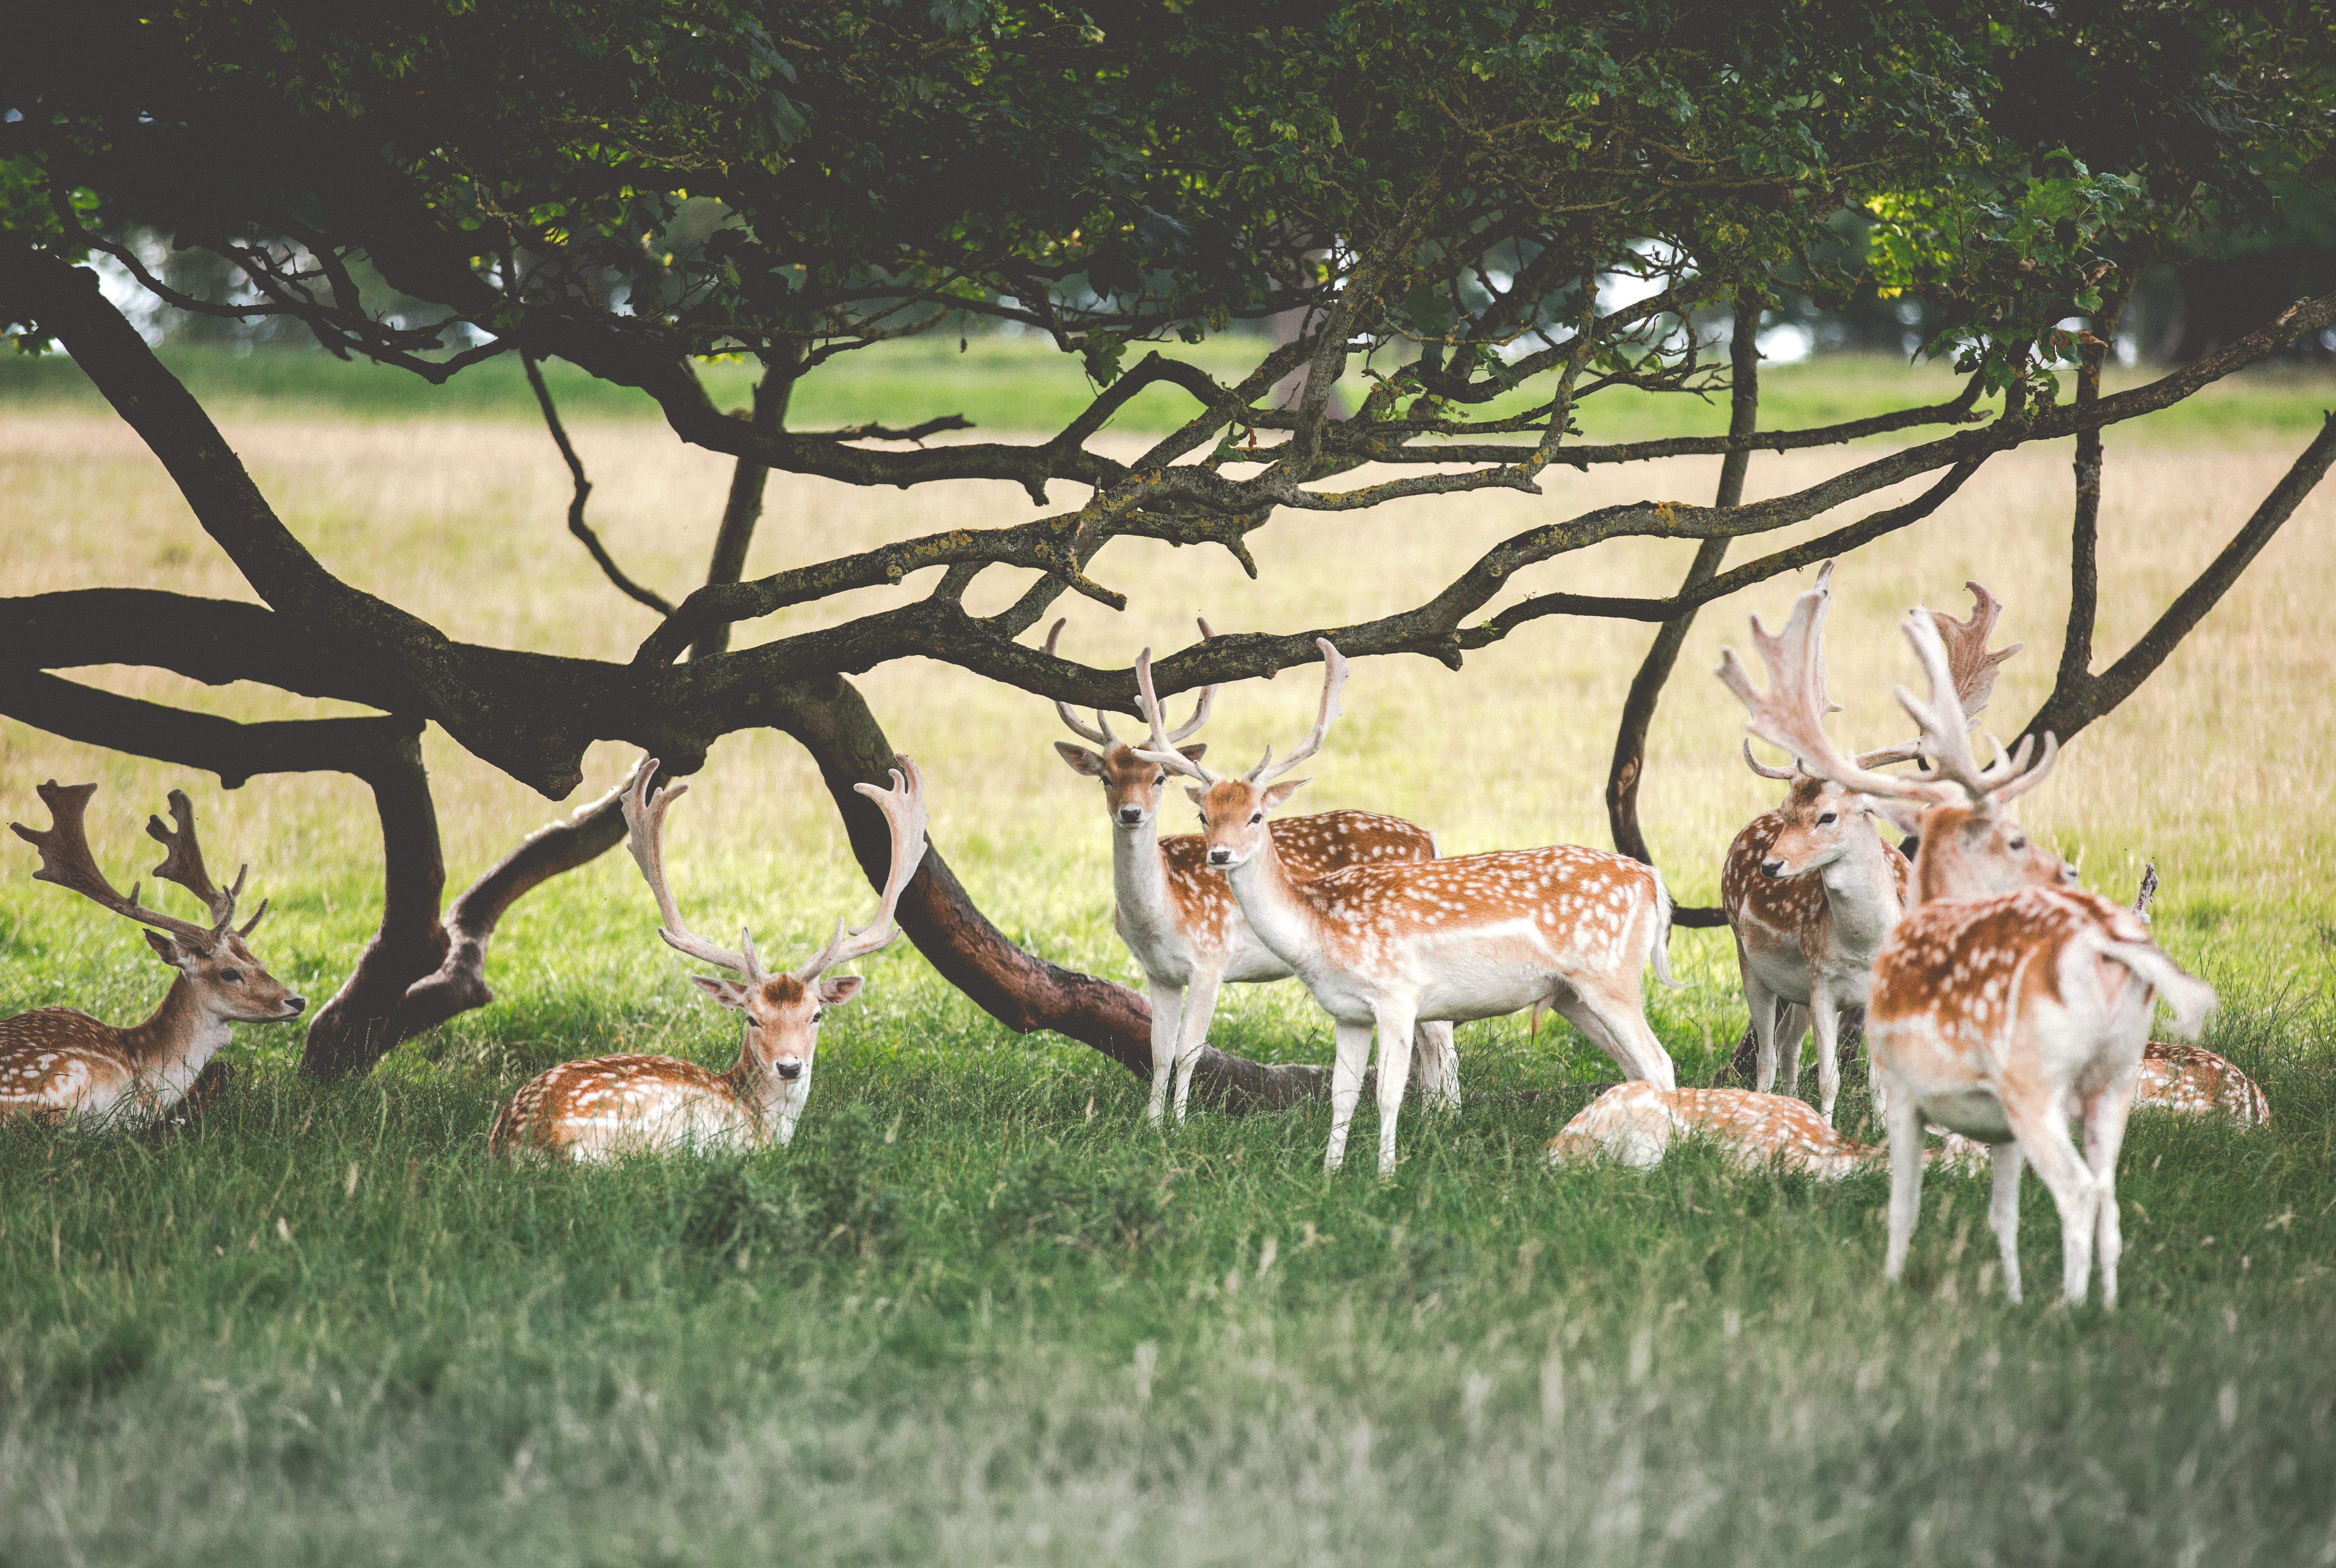 herd of spotted bucks under a tree during daytime